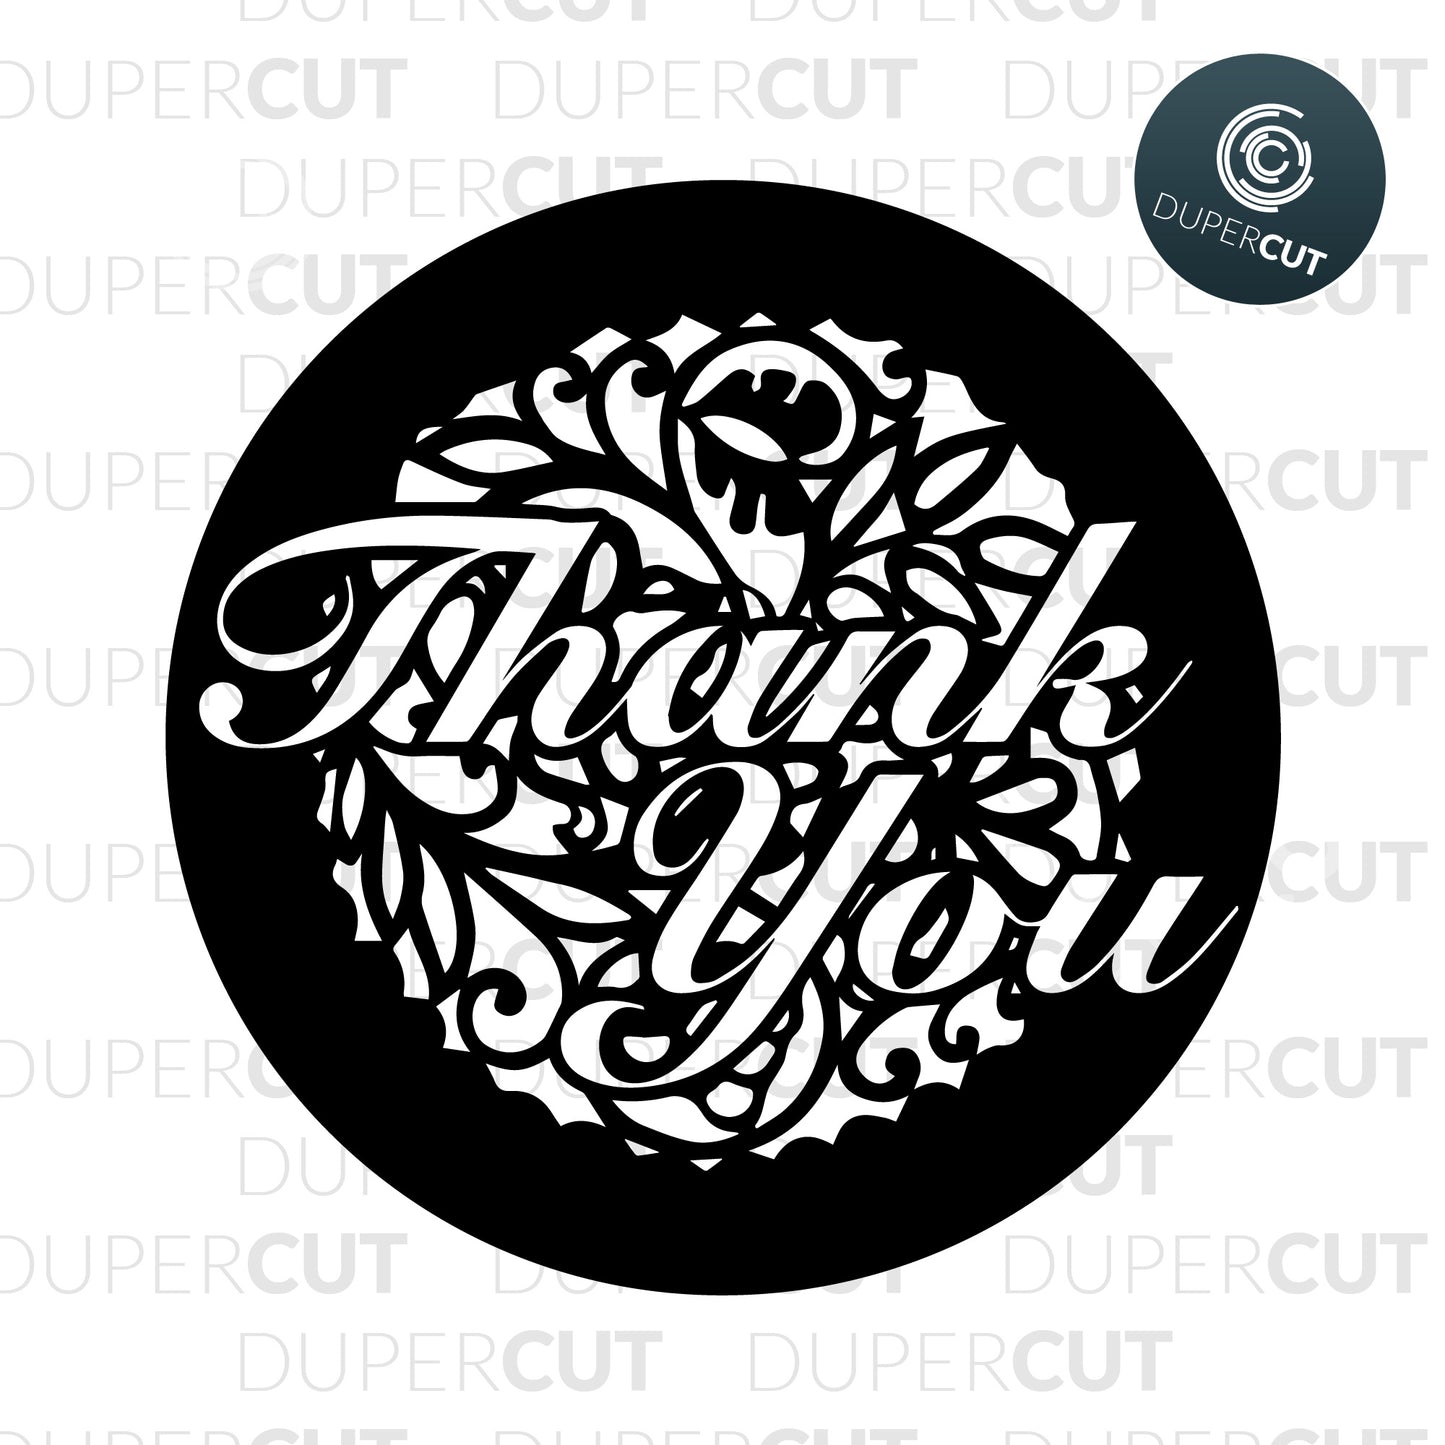 Round thank you disk, free  template - SVG DXF PNG files for Cricut, Glowforge, Silhouette Cameo, CNC Machines